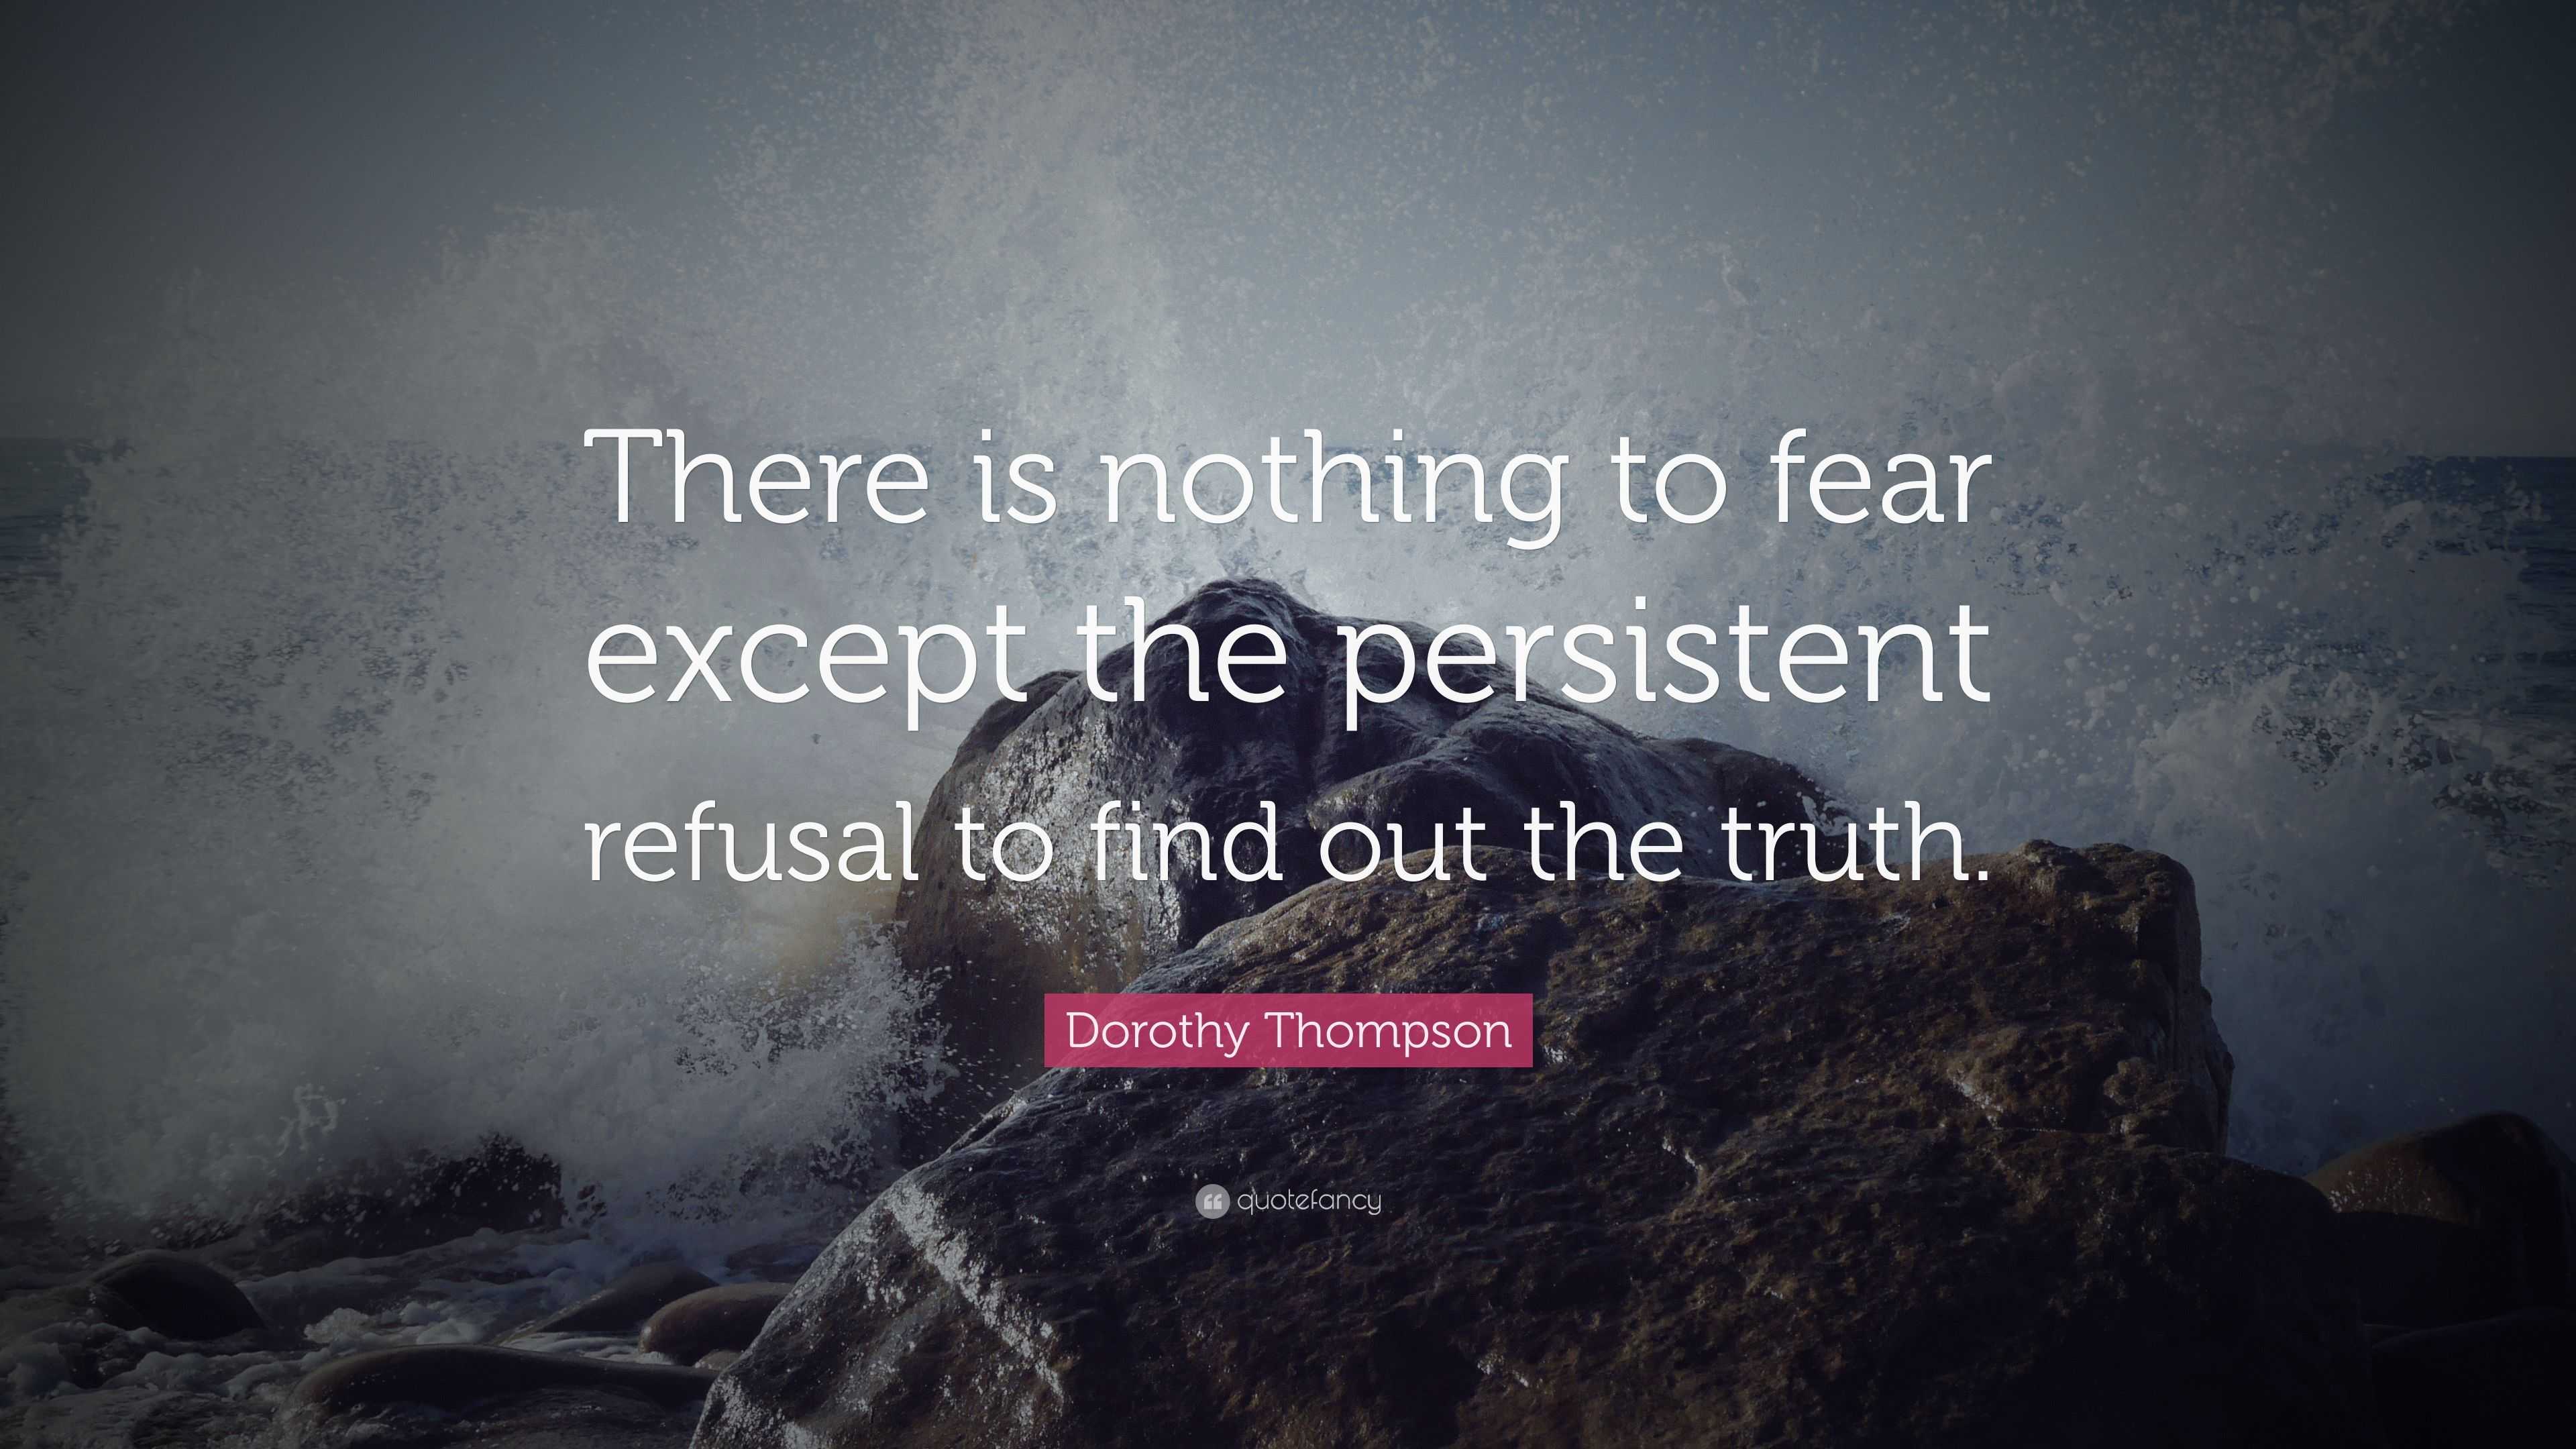 Dorothy Thompson Quote: “There is nothing to fear except the persistent ...